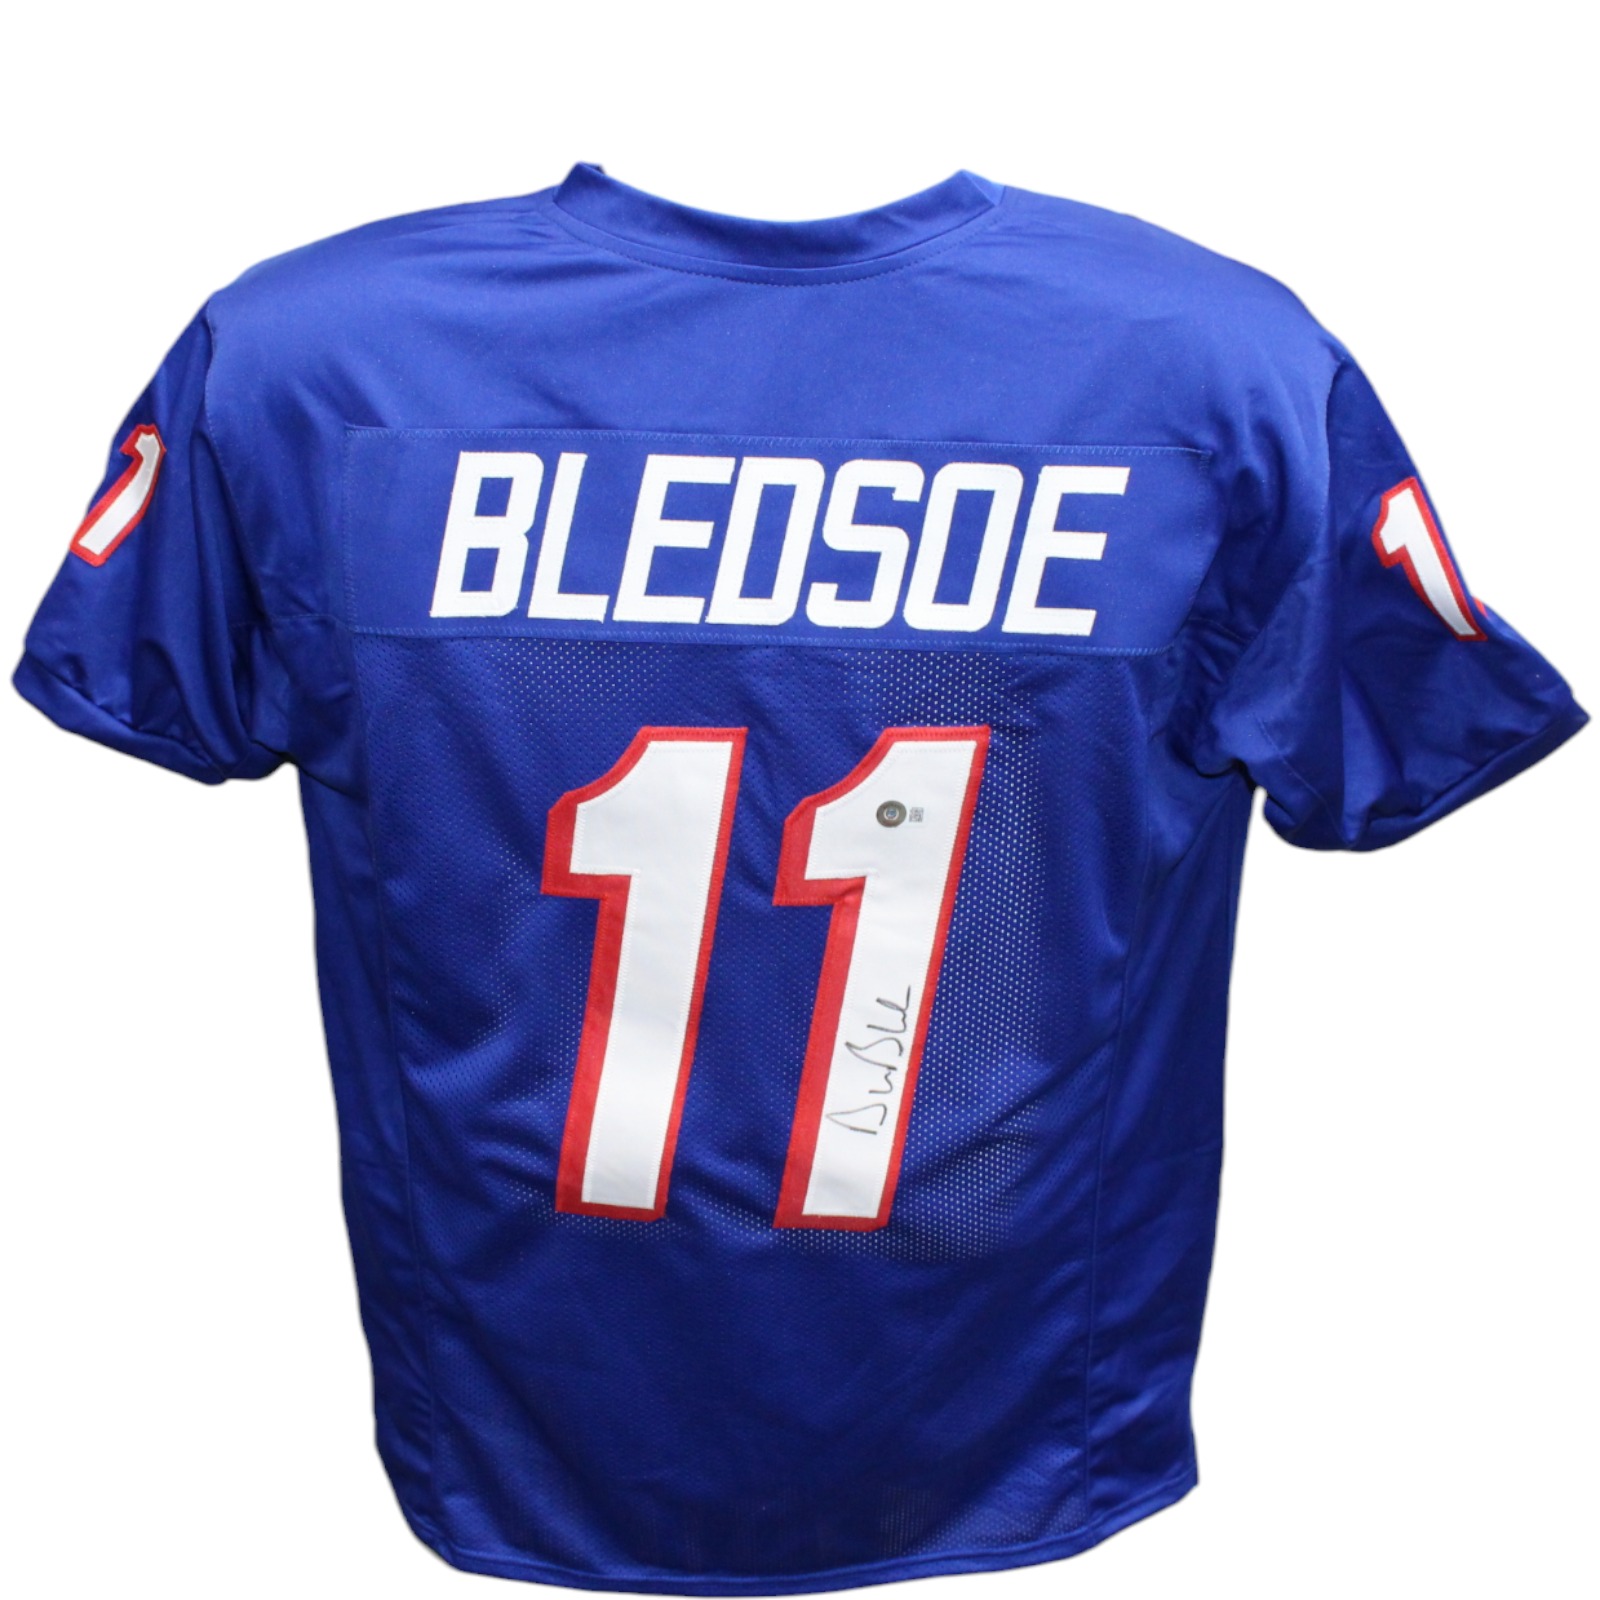 Drew Bledsoe Autographed/Signed Pro Style Blue Jersey Beckett